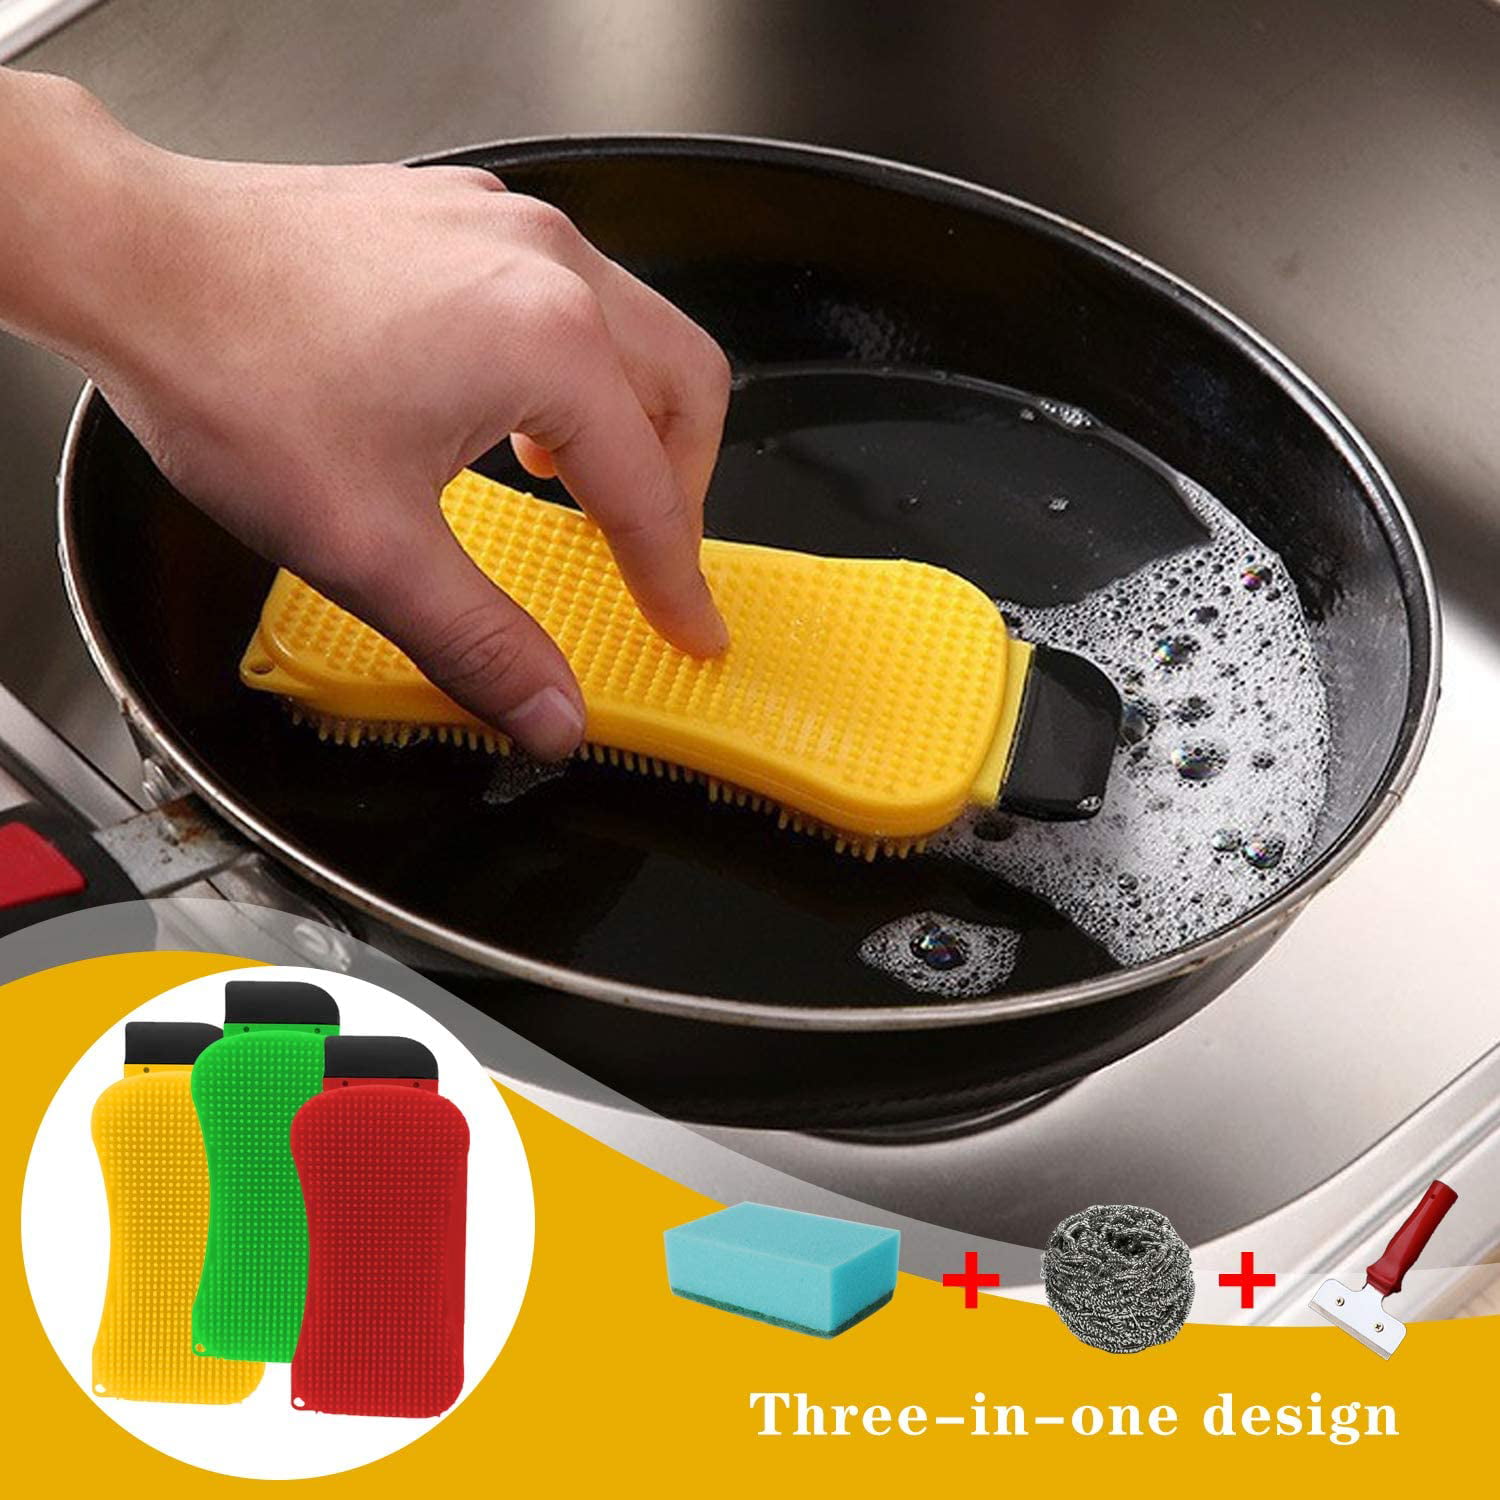 Geloo Silicone Sponge Dish Sponges Silicone Sponge Dish Washing Kitchen Gadgets Brush Accessories Kitchen Sponge Double Sided Cleaning Sponges (3